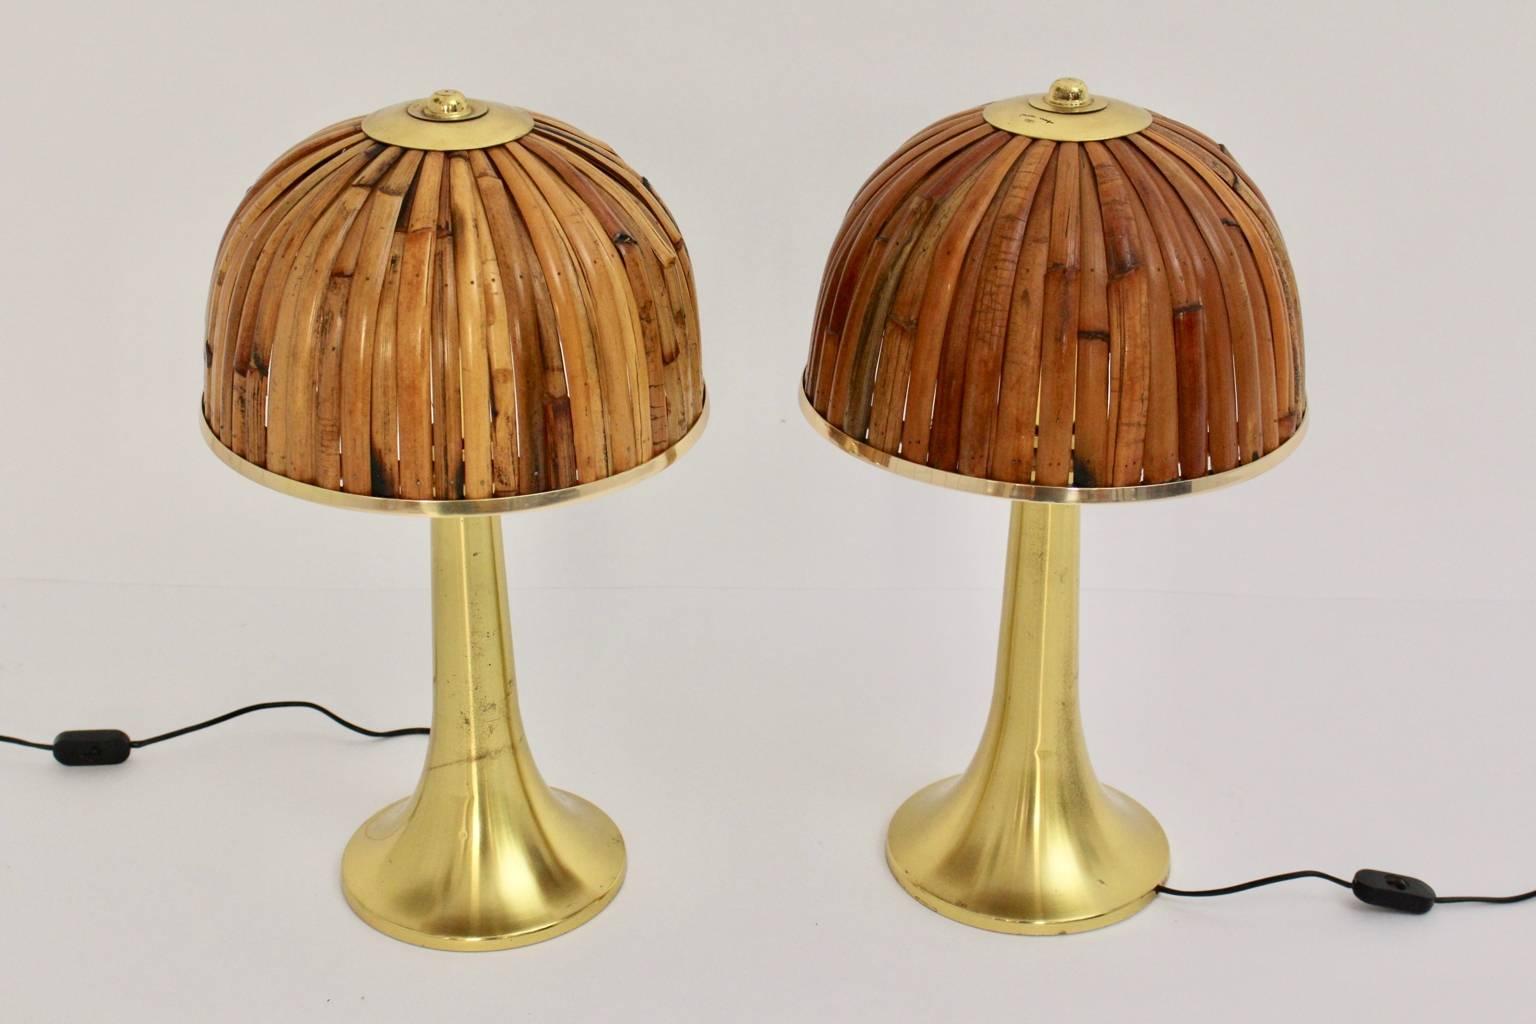 We gladly present a pair of high-quality table lamps by Gabriella Crespi from 1973 . Important design!
Gabriella Crespi (1922-2017)
The Fungo table lamps were made of brass and the dome shades were made of many bamboo pieces with brass rings.
The